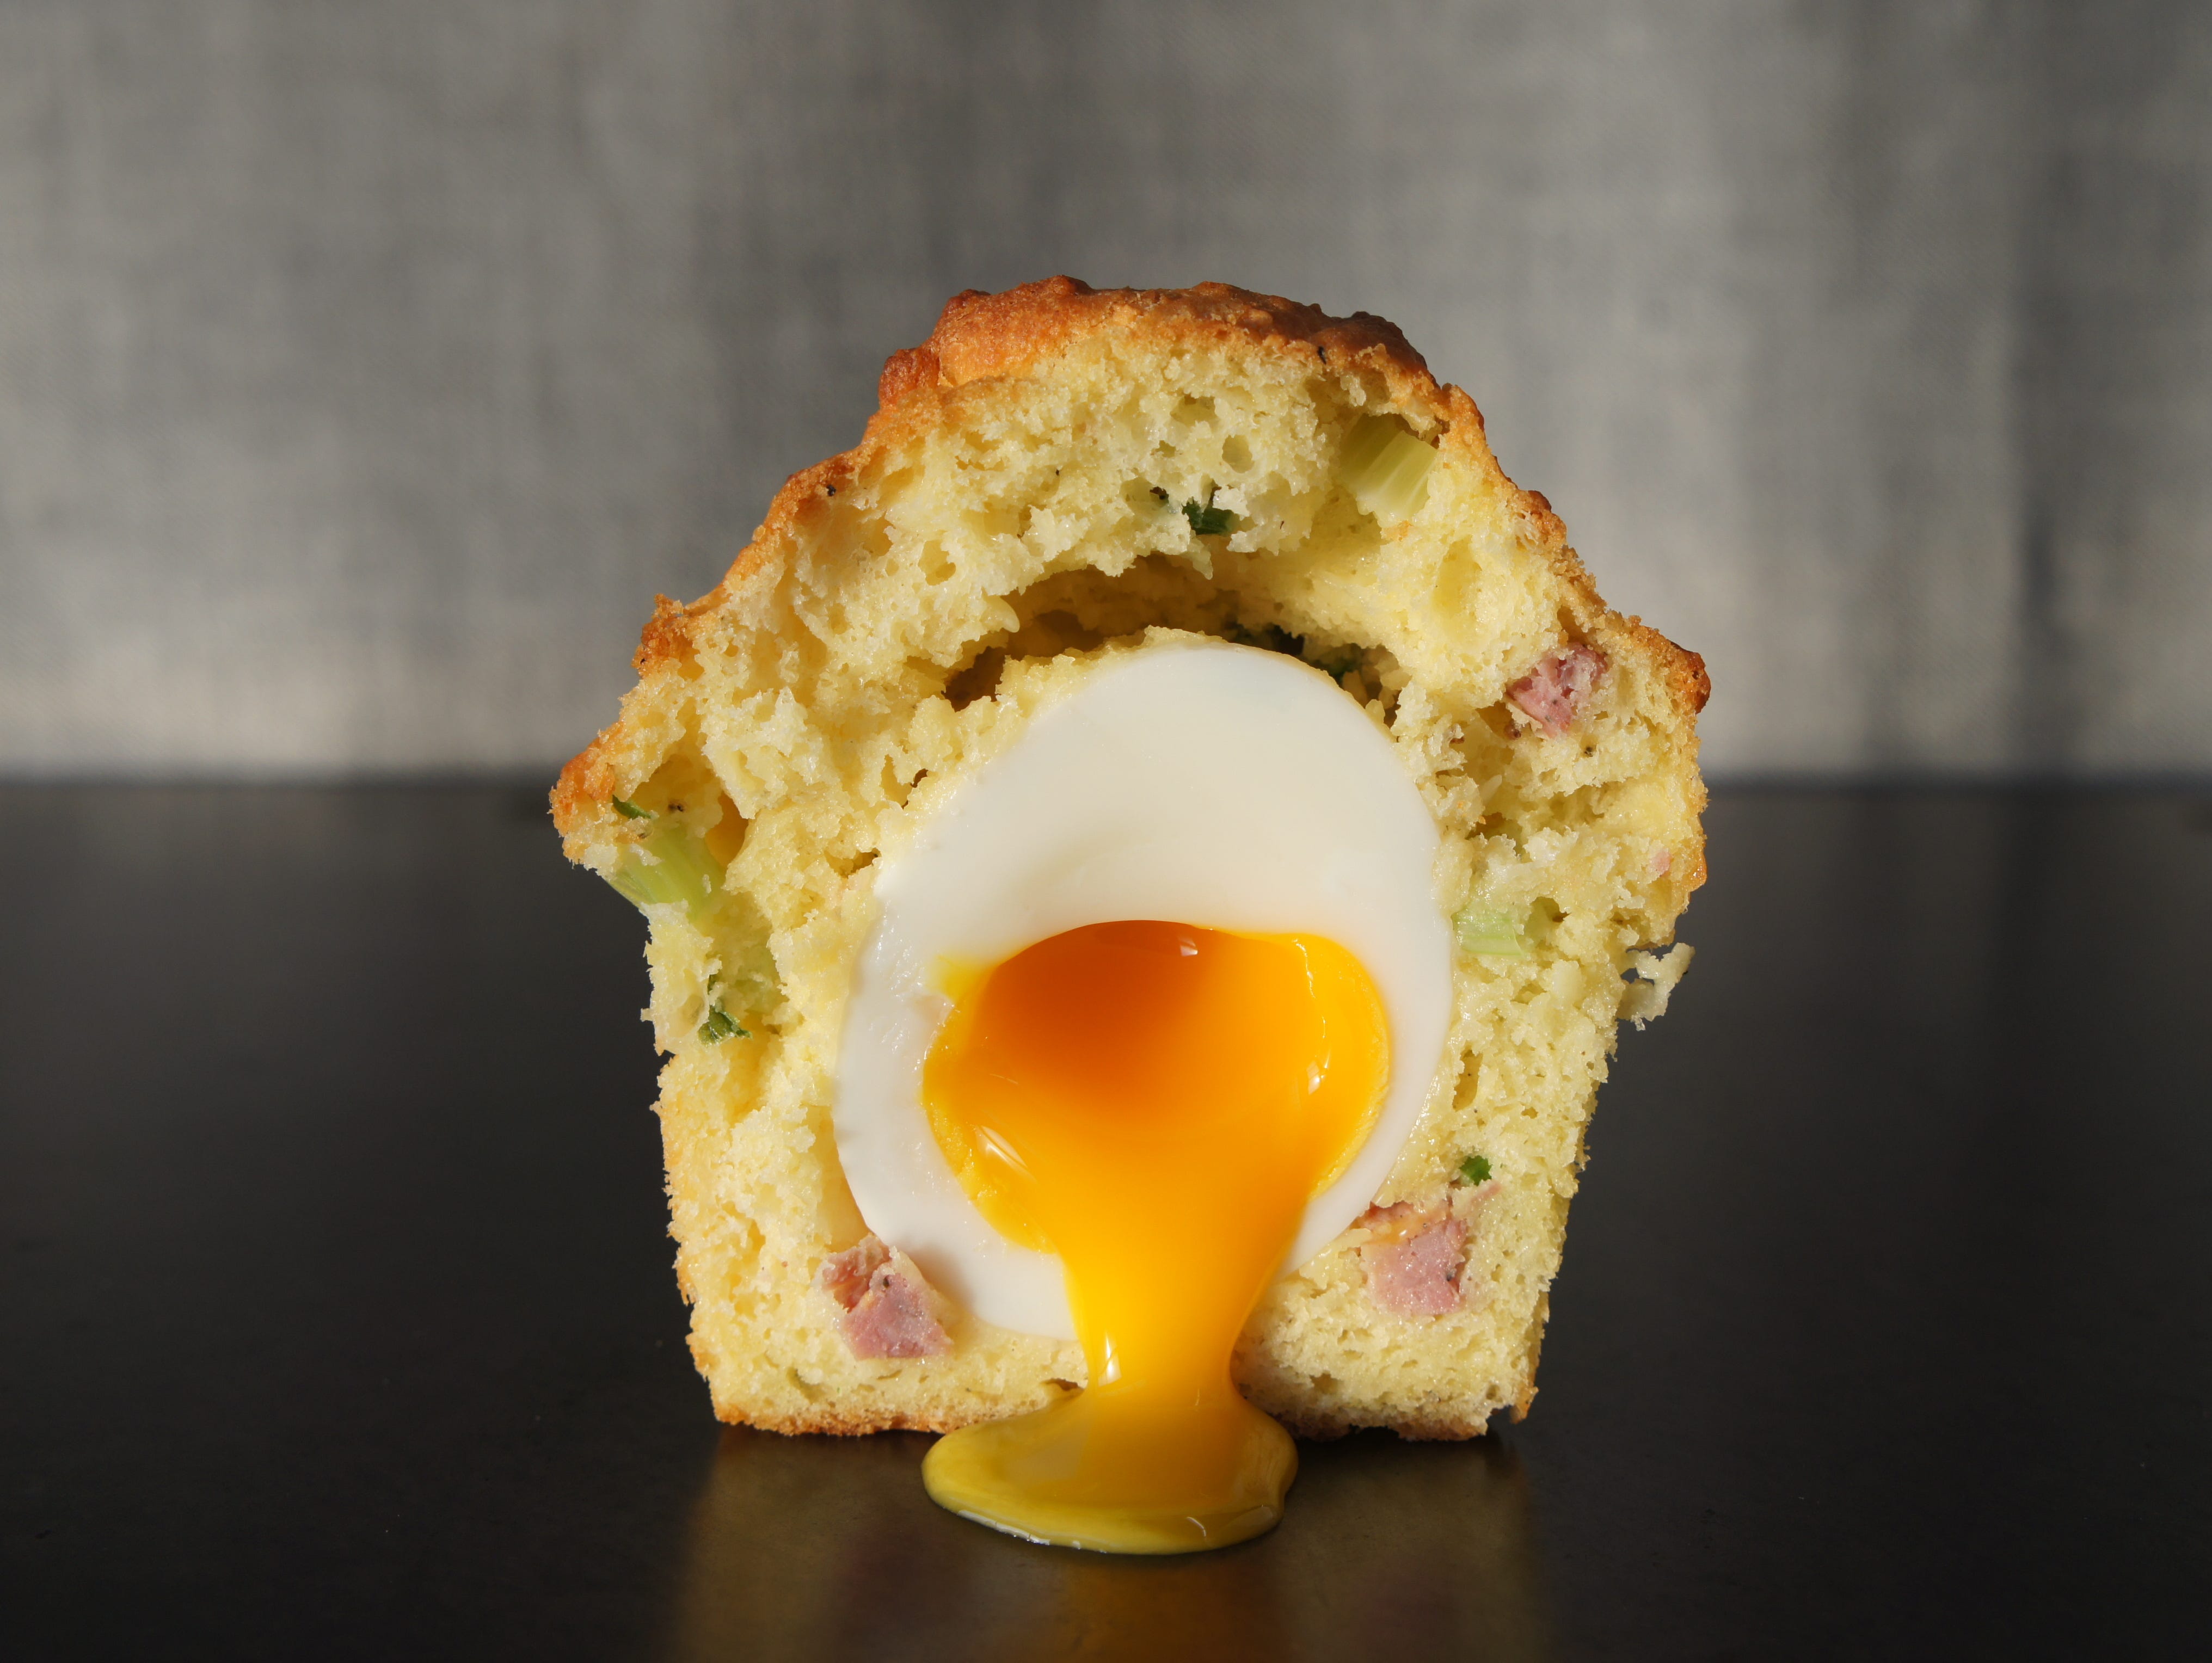 Named after Hank Williams III, this unique creation is an all-in-one breakfast muffin made with asiago, sausage, green onion and a soft-cooked farm egg in the center.